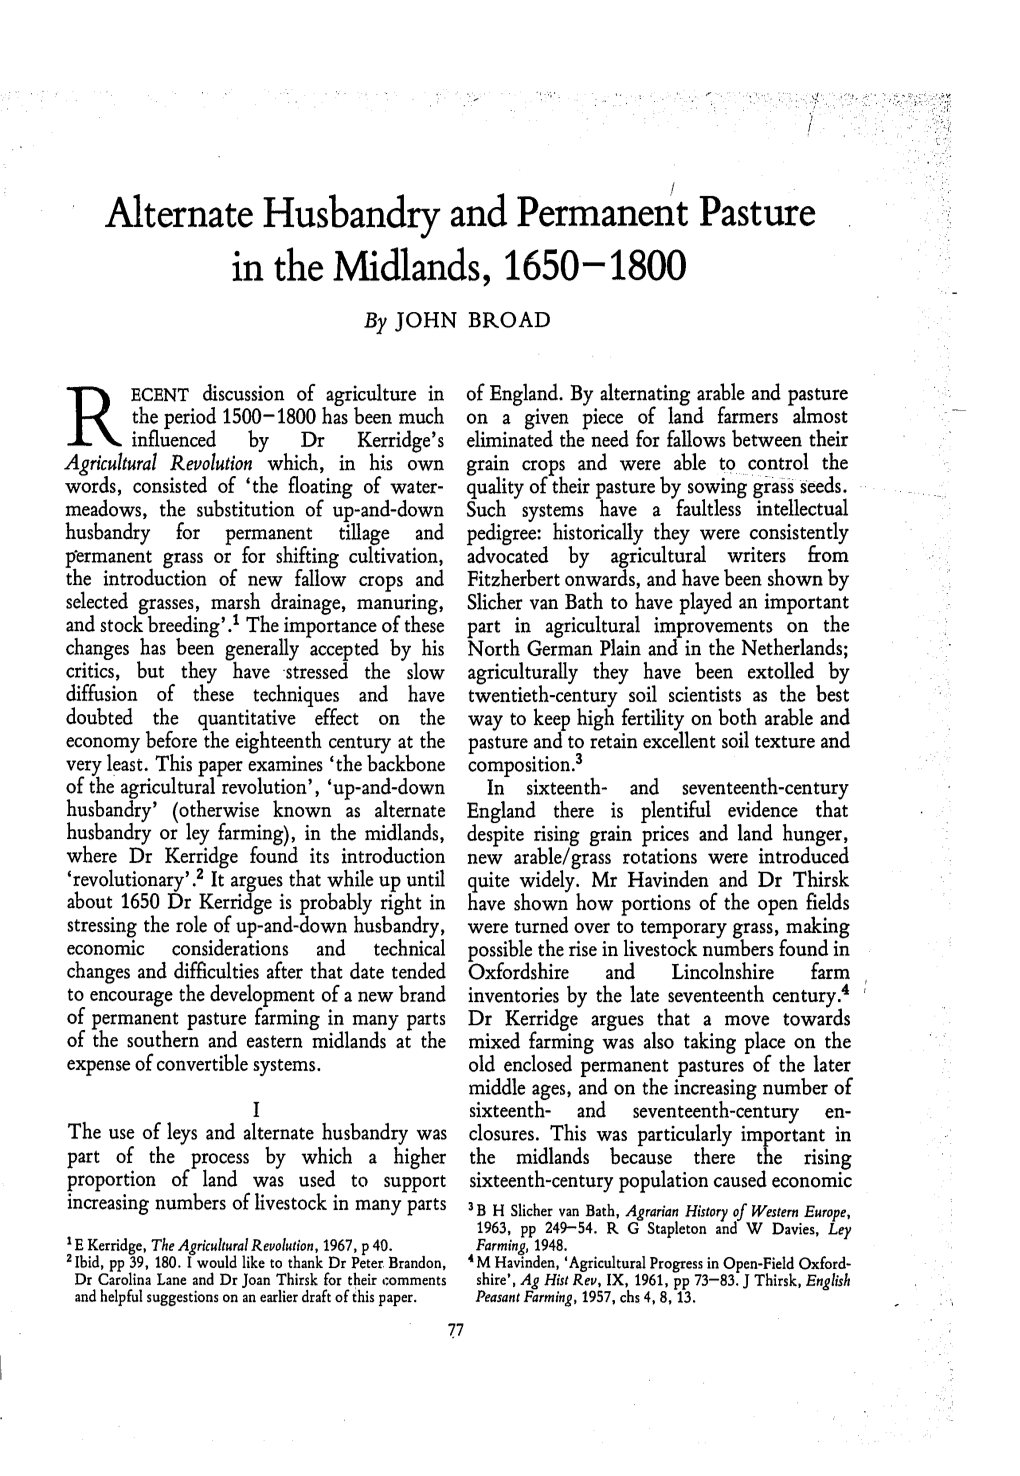 Alternate Husbandry and Permanent Pasture in the Midlands, 1650-1800 by JOHN BROAD